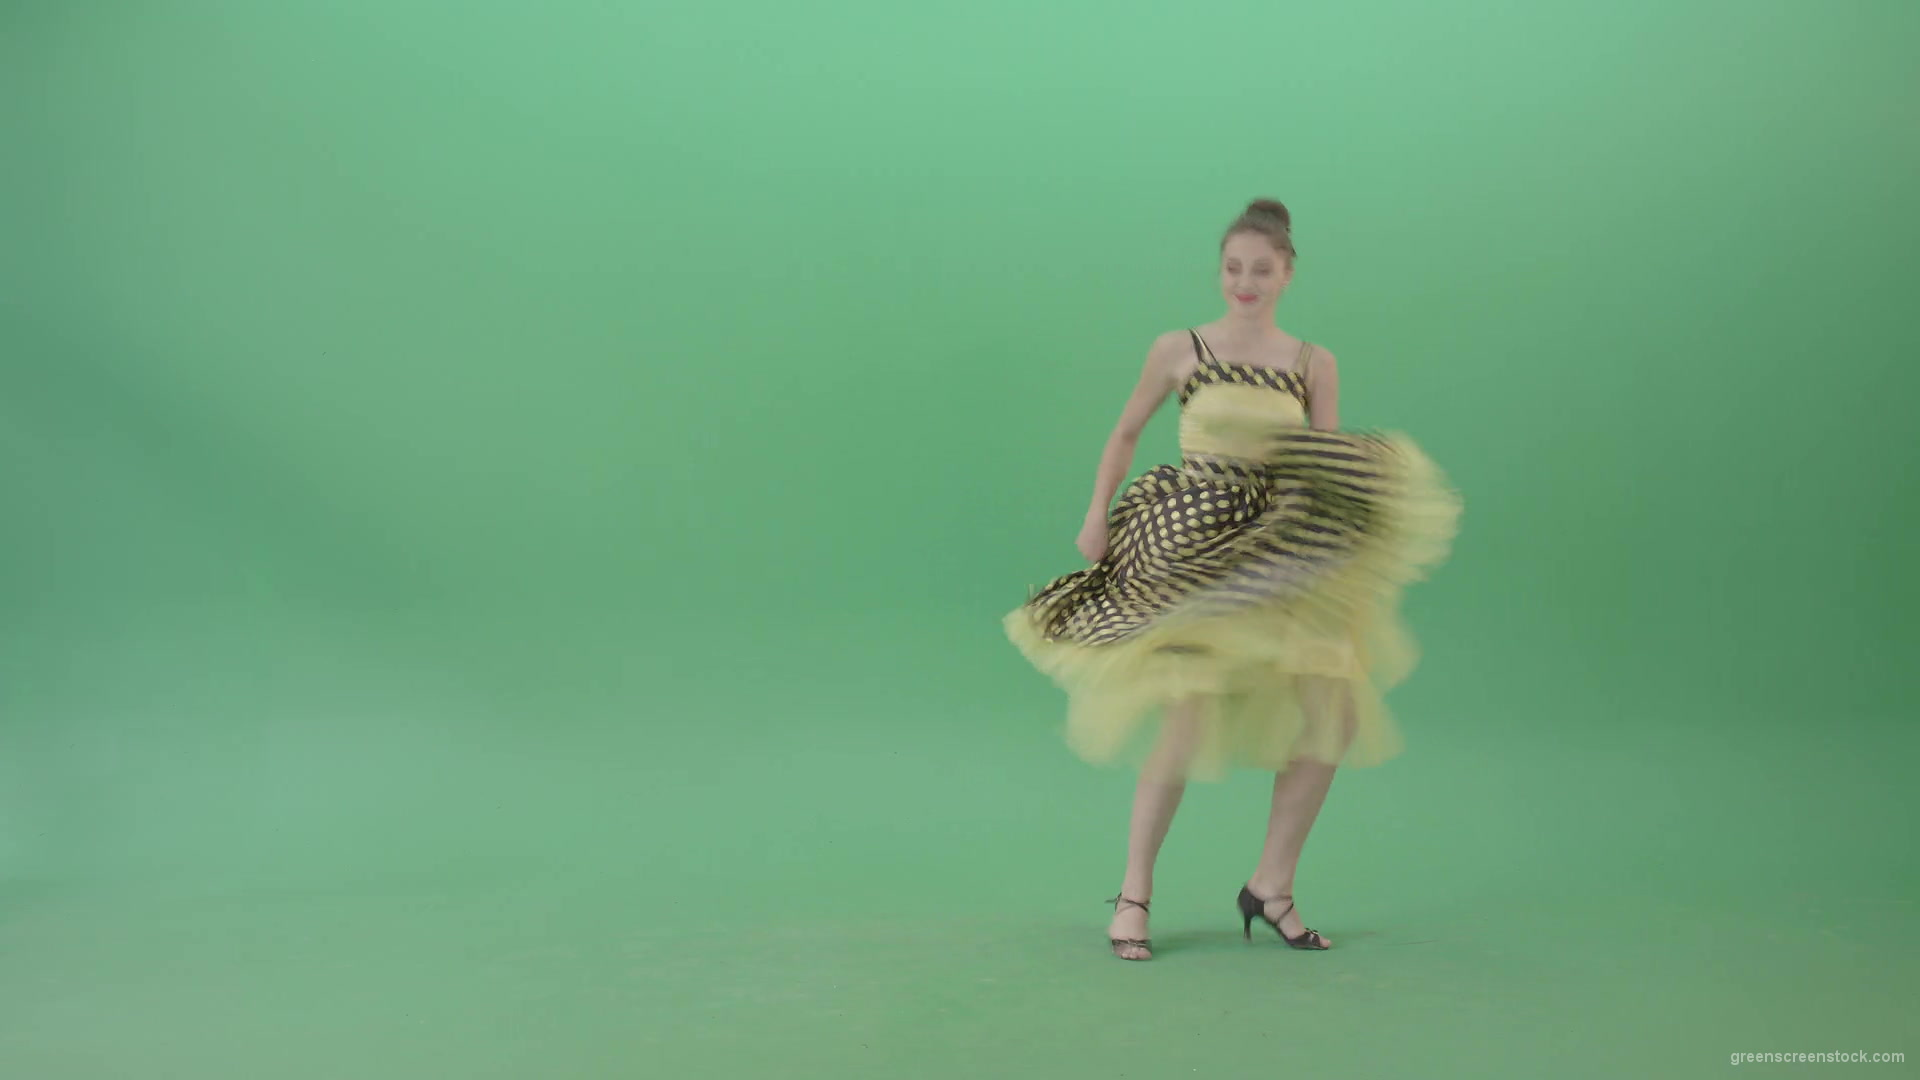 Elegant-Girl-in-Yellow-dress-Dancing-Boogie-woogie-and-chill-on-Green-Screen-4K-Video-Footage-1920_008 Green Screen Stock